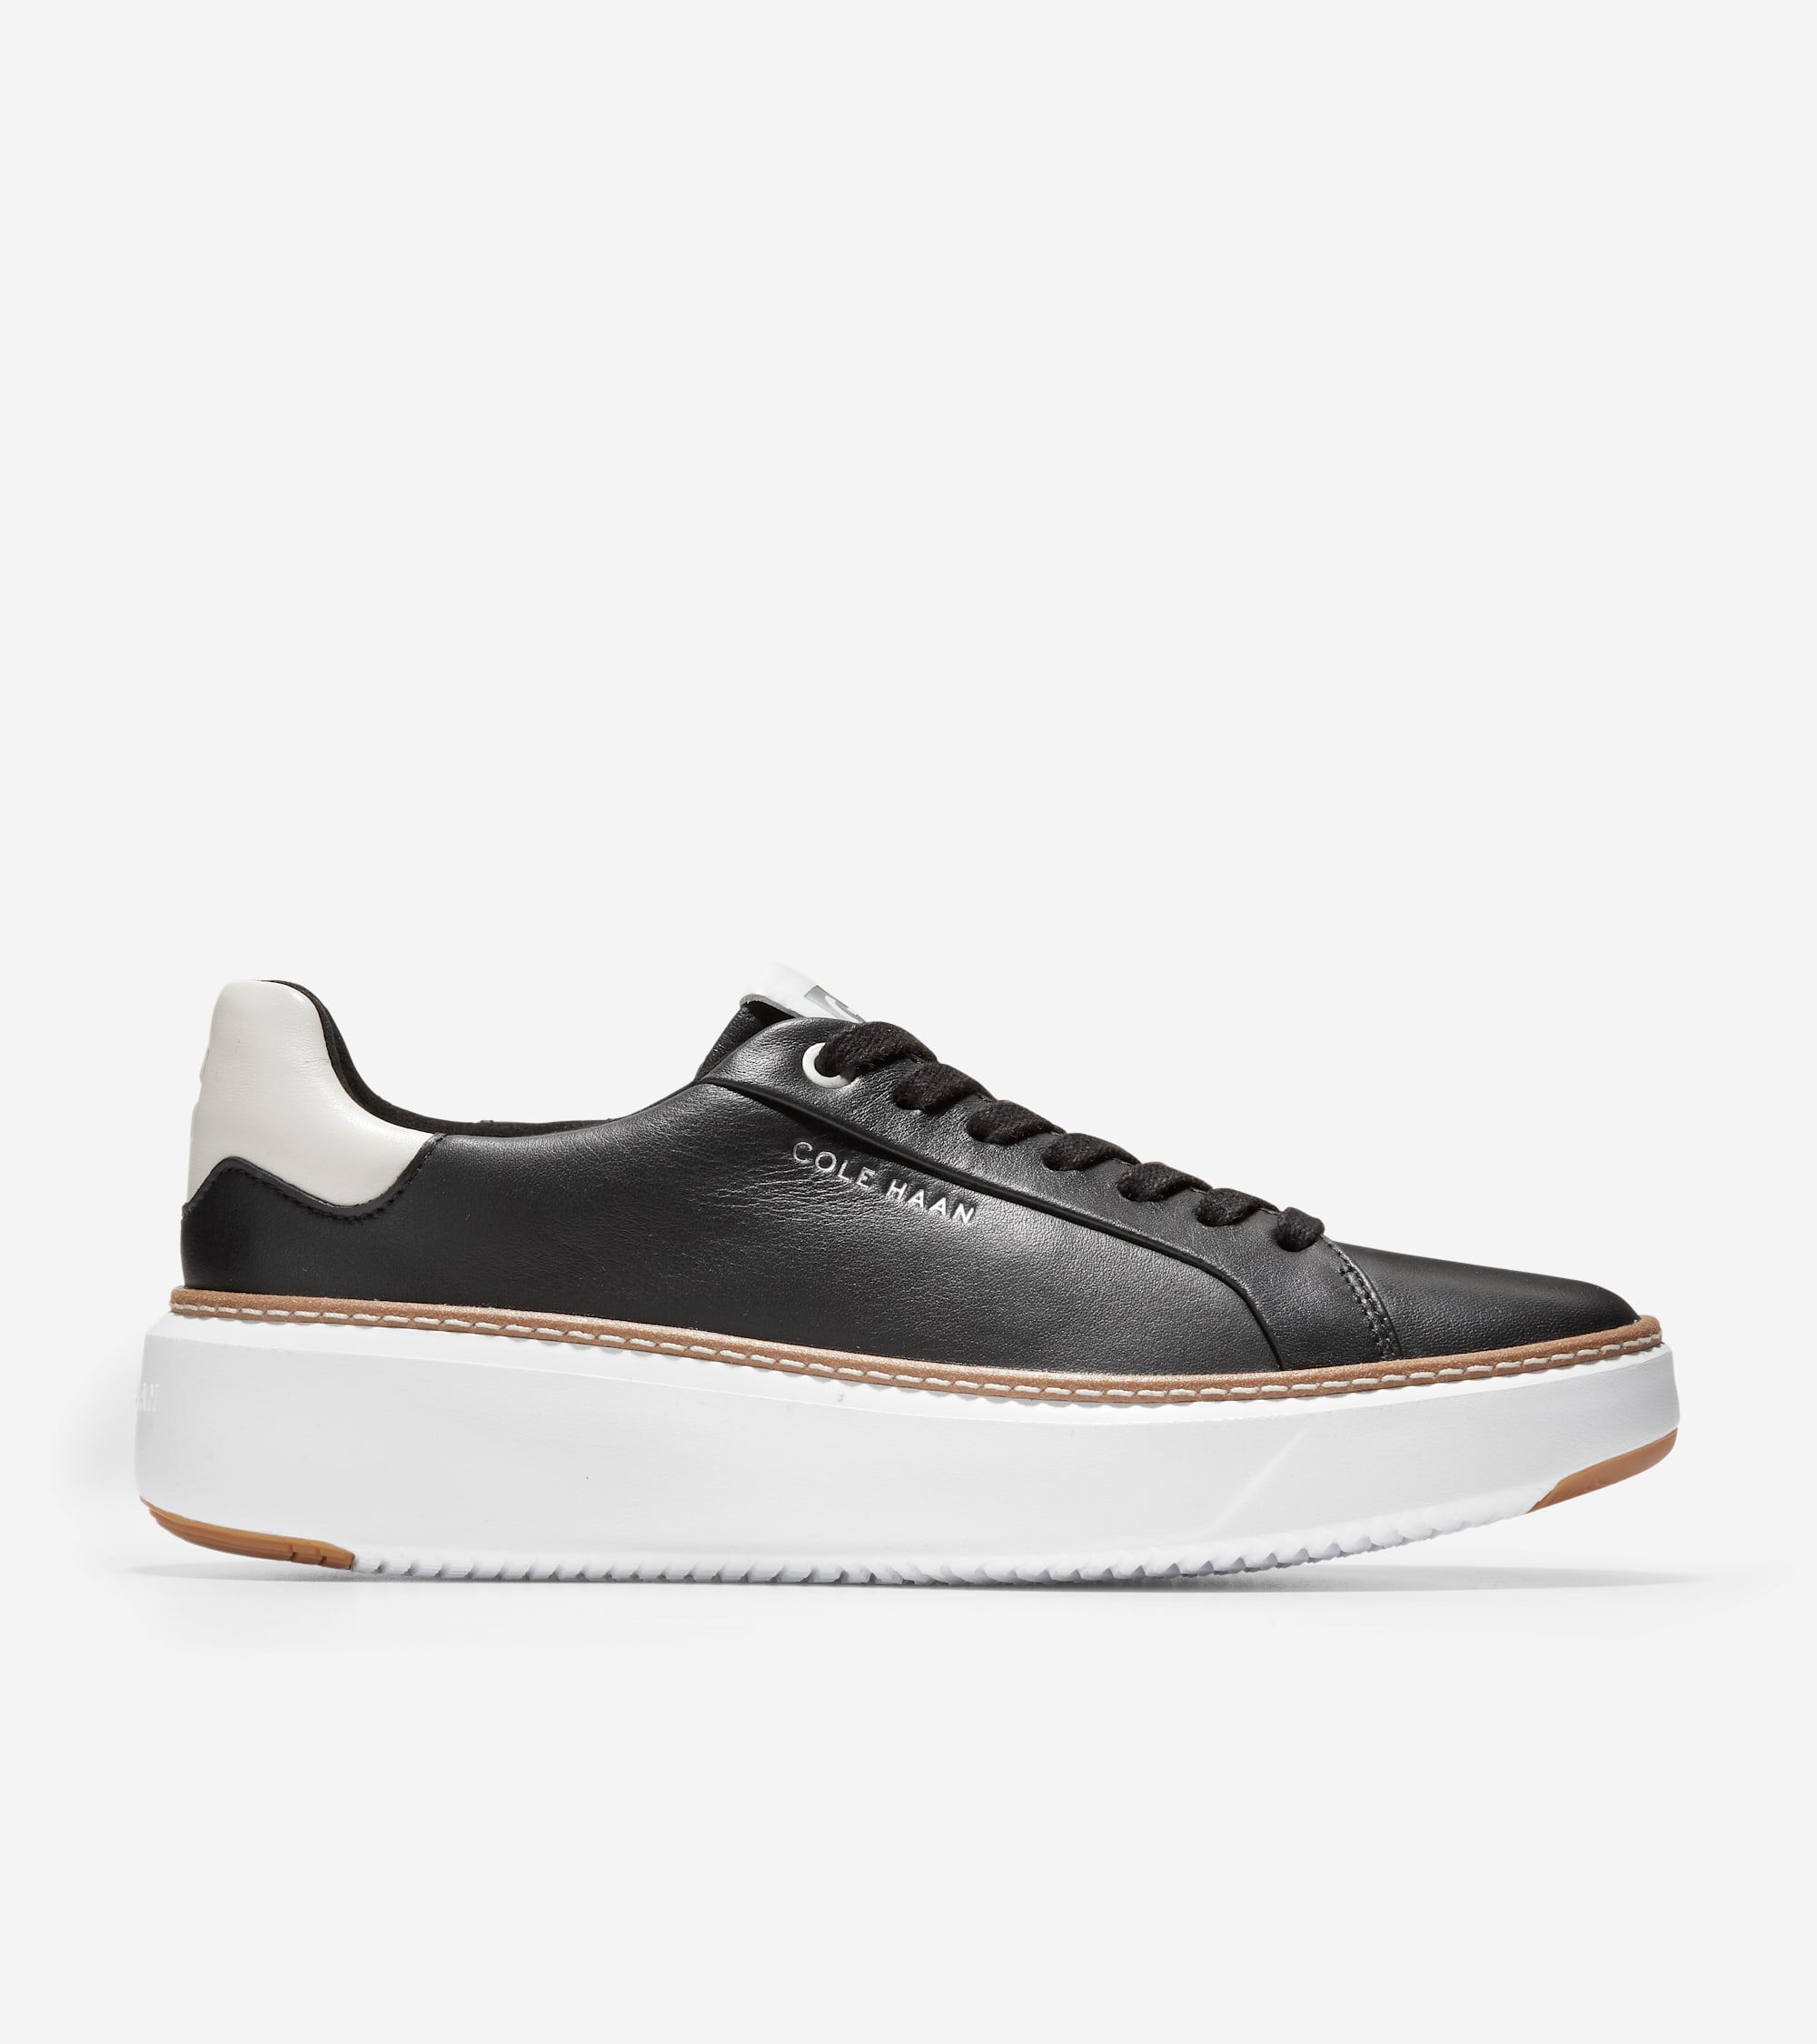 Men's Cole Haan Sneakers & Athletic Shoes + FREE SHIPPING | Zappos.com